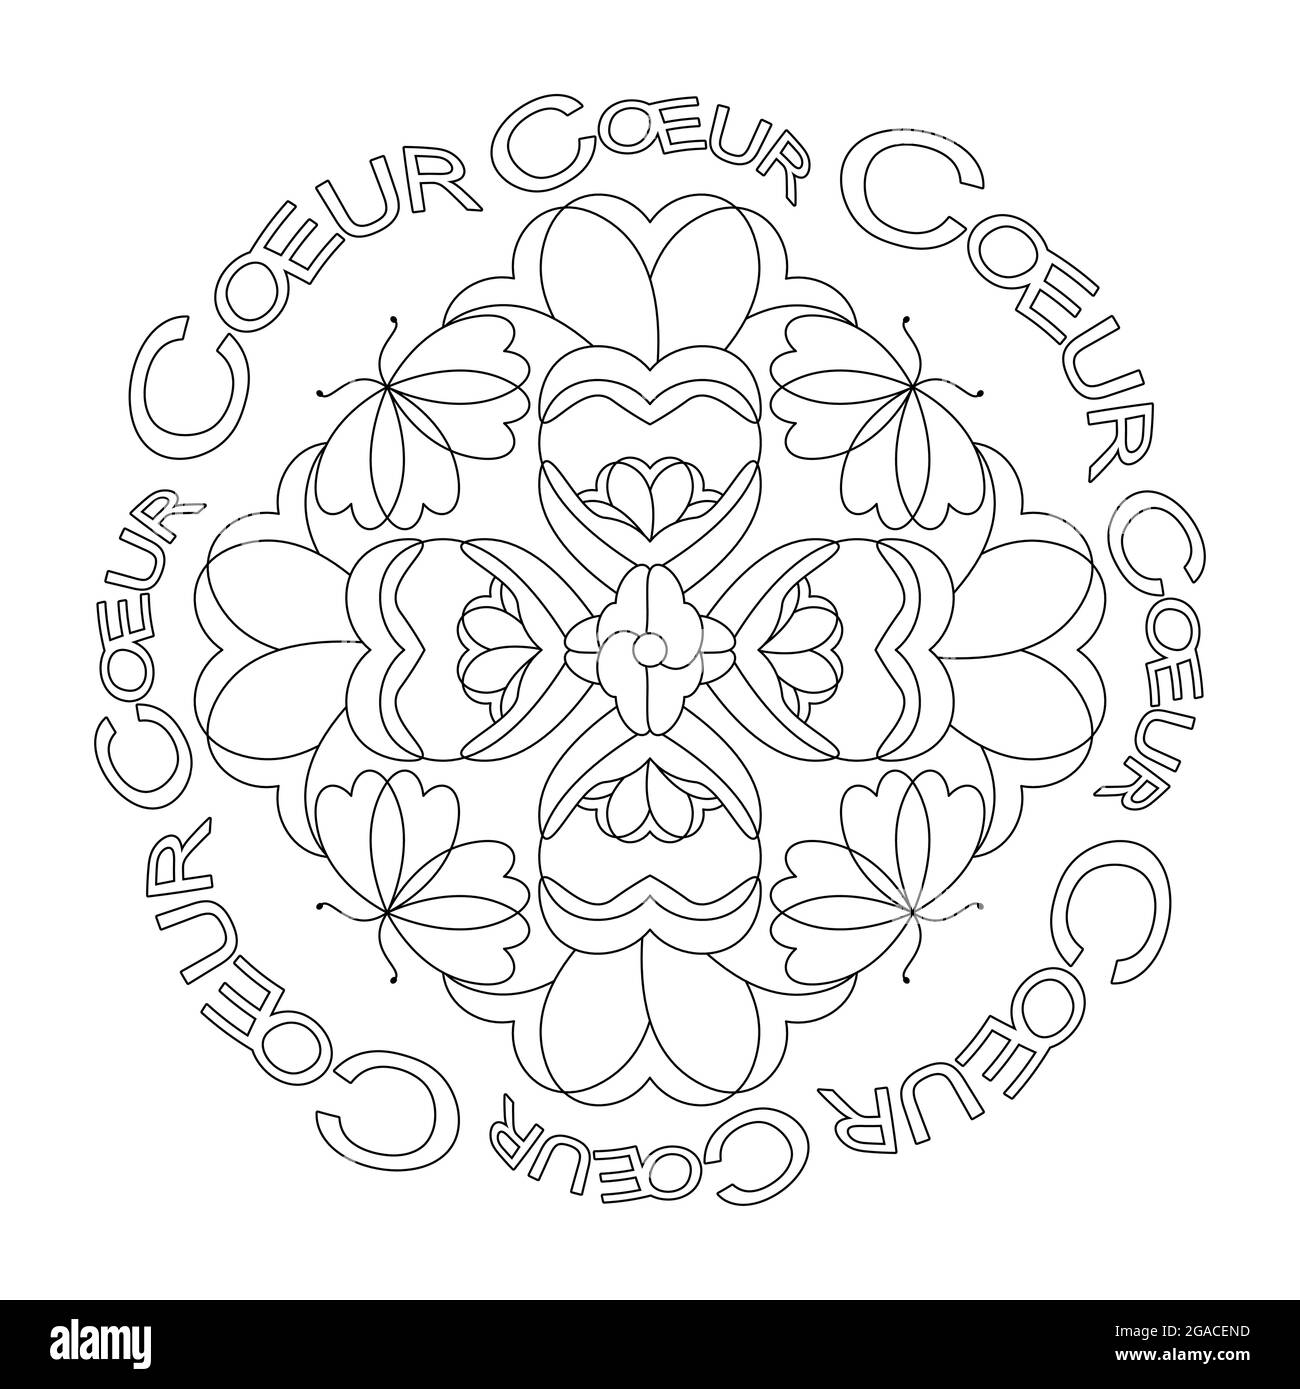 Mandala with hearts and butterflies. Heart text in french. Anti-stress coloring page. Art Therapy. Vector illustration black and white. Stock Vector